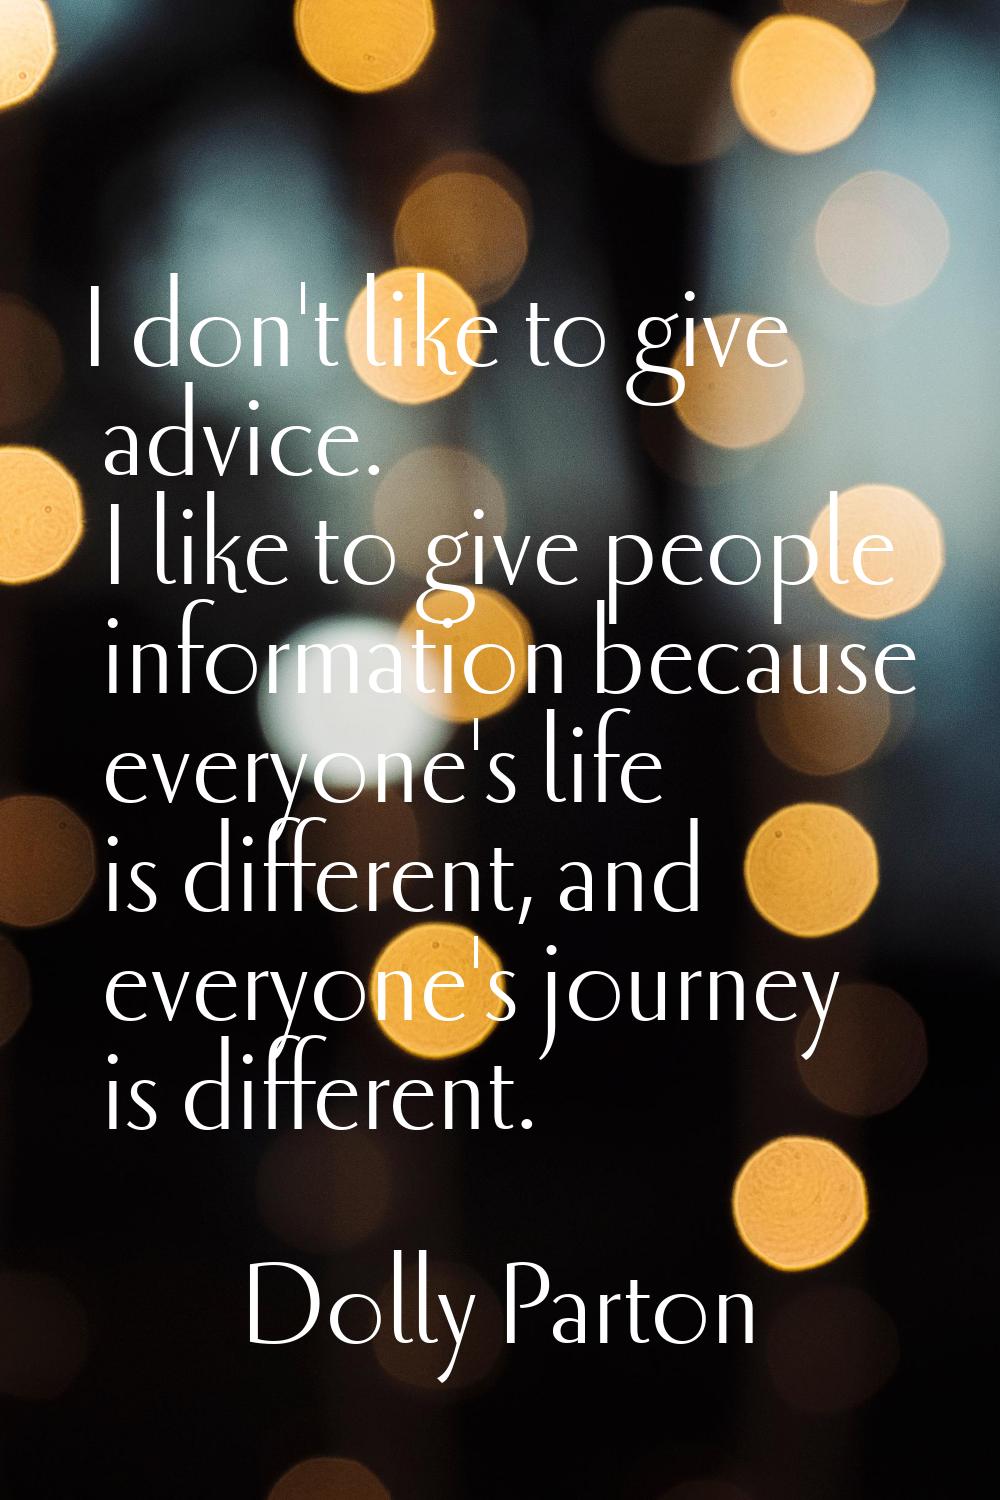 I don't like to give advice. I like to give people information because everyone's life is different